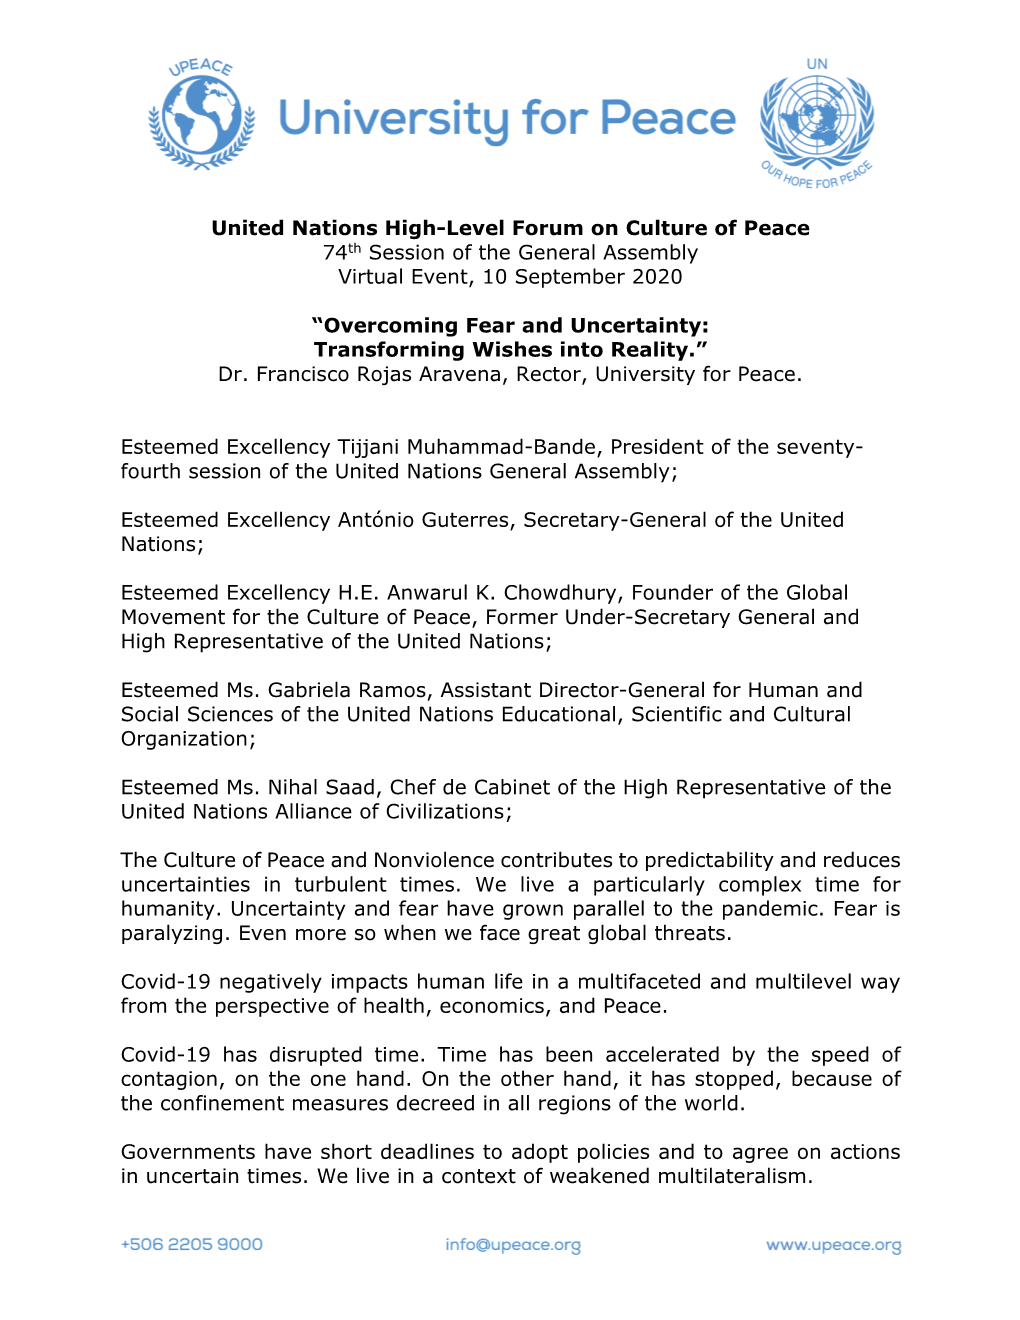 United Nations High-Level Forum on Culture of Peace 74Th Session of the General Assembly Virtual Event, 10 September 2020